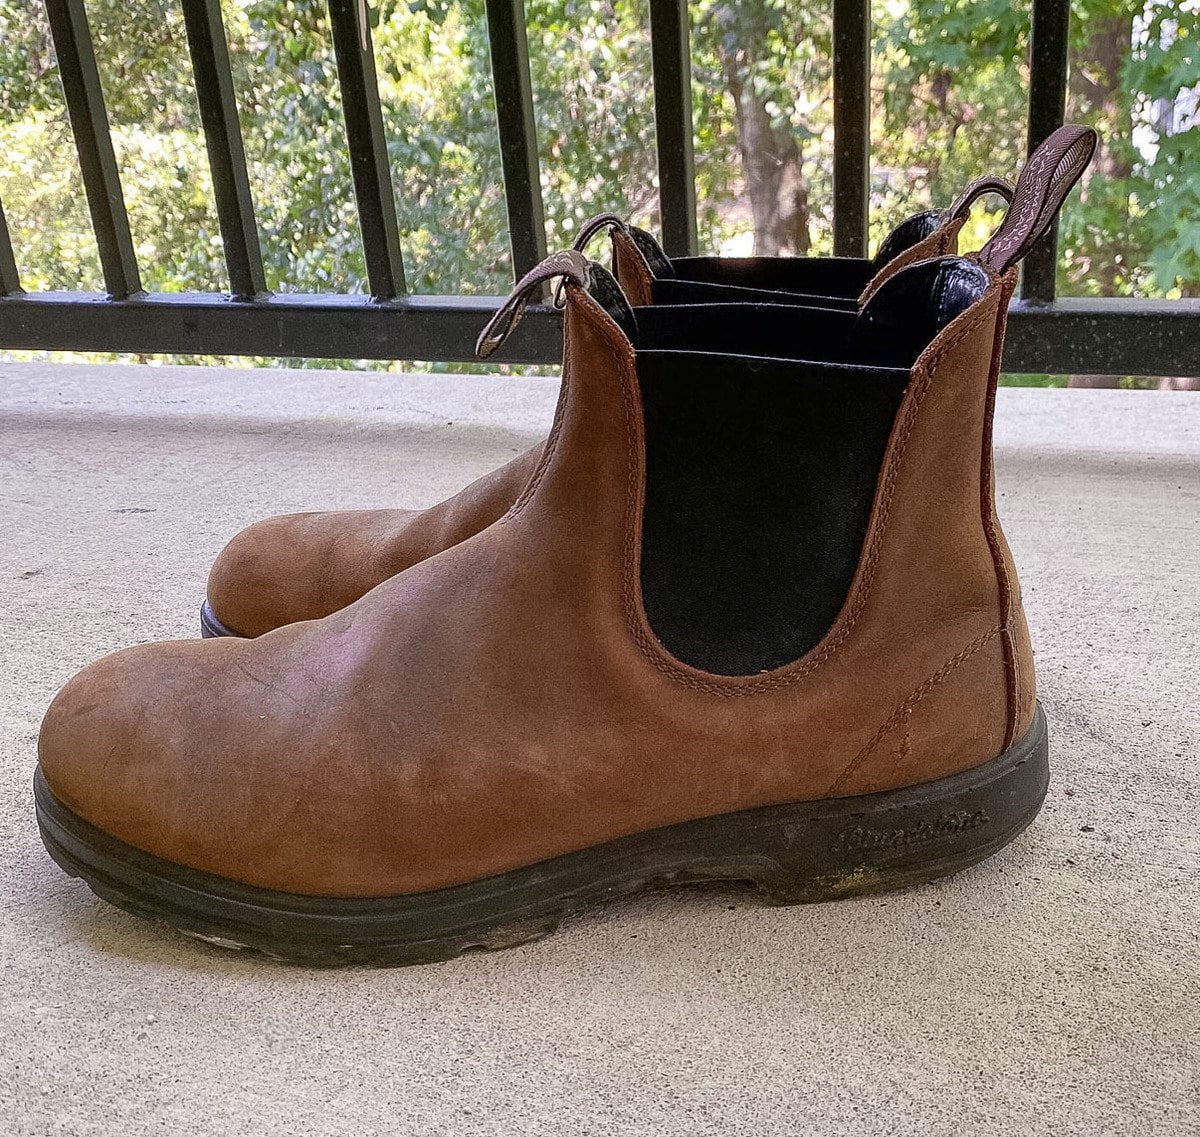 Blundstone classic 550s side view